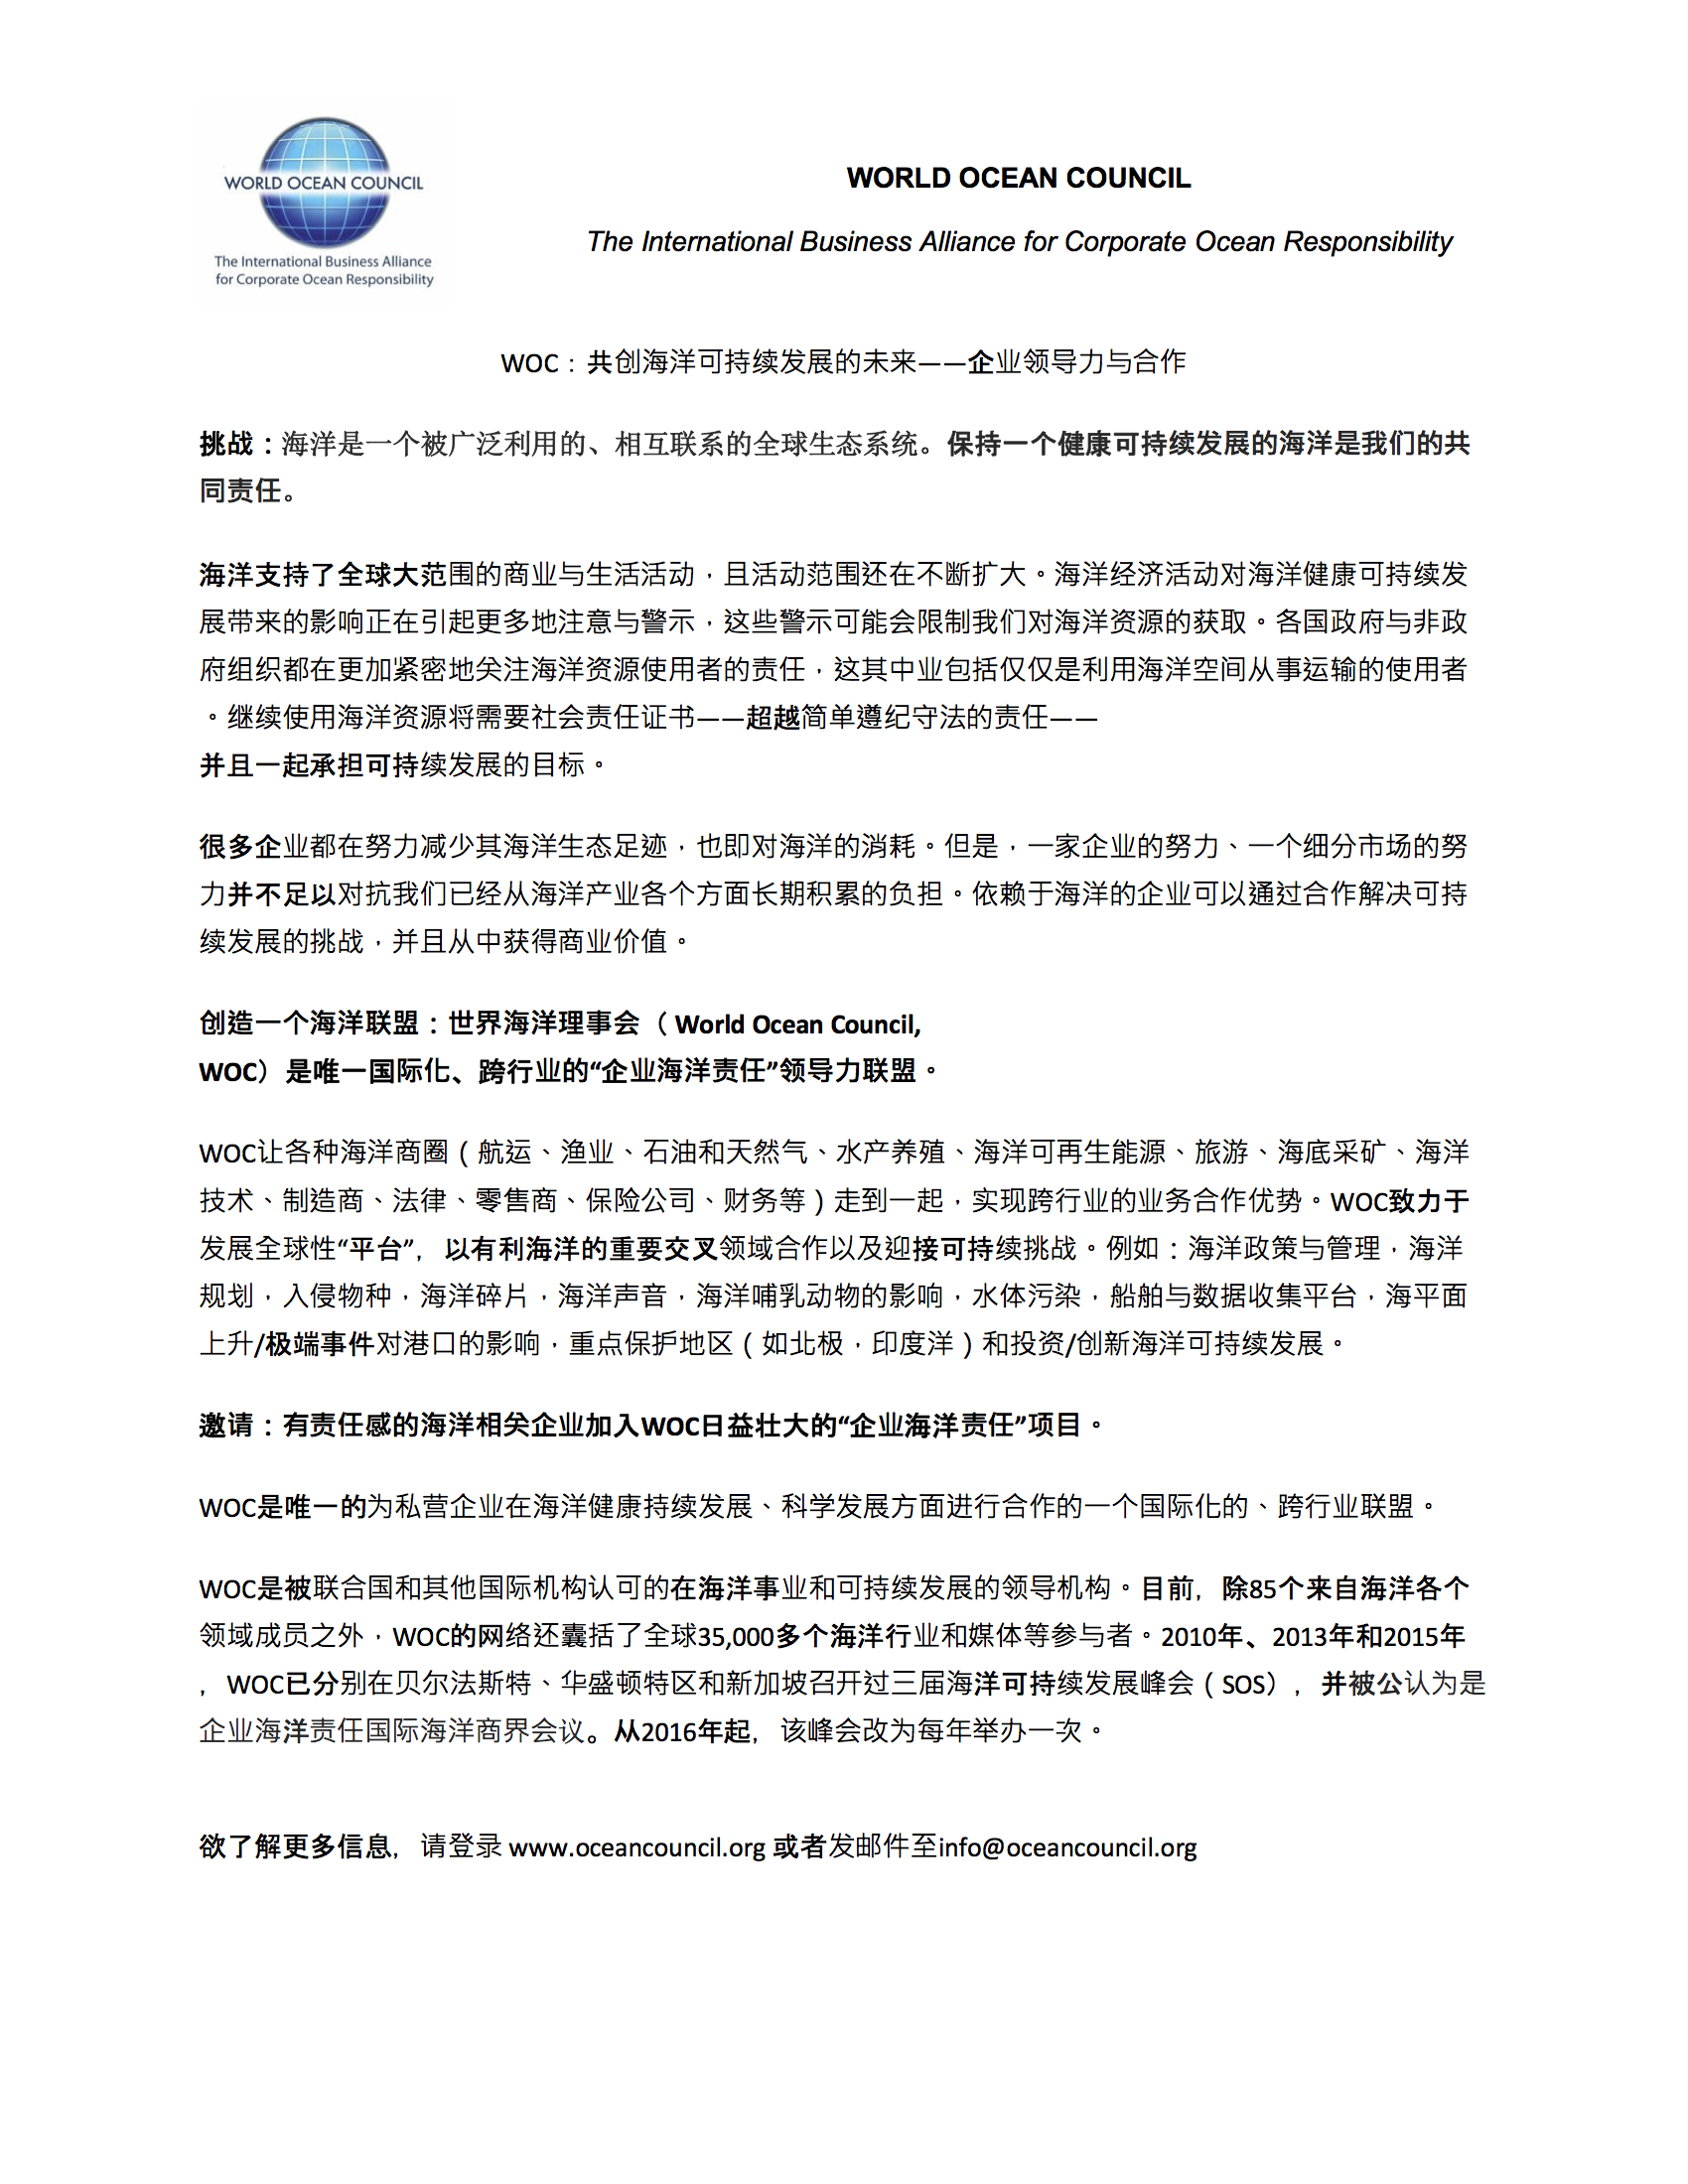 WOC in One Page, in Chinese